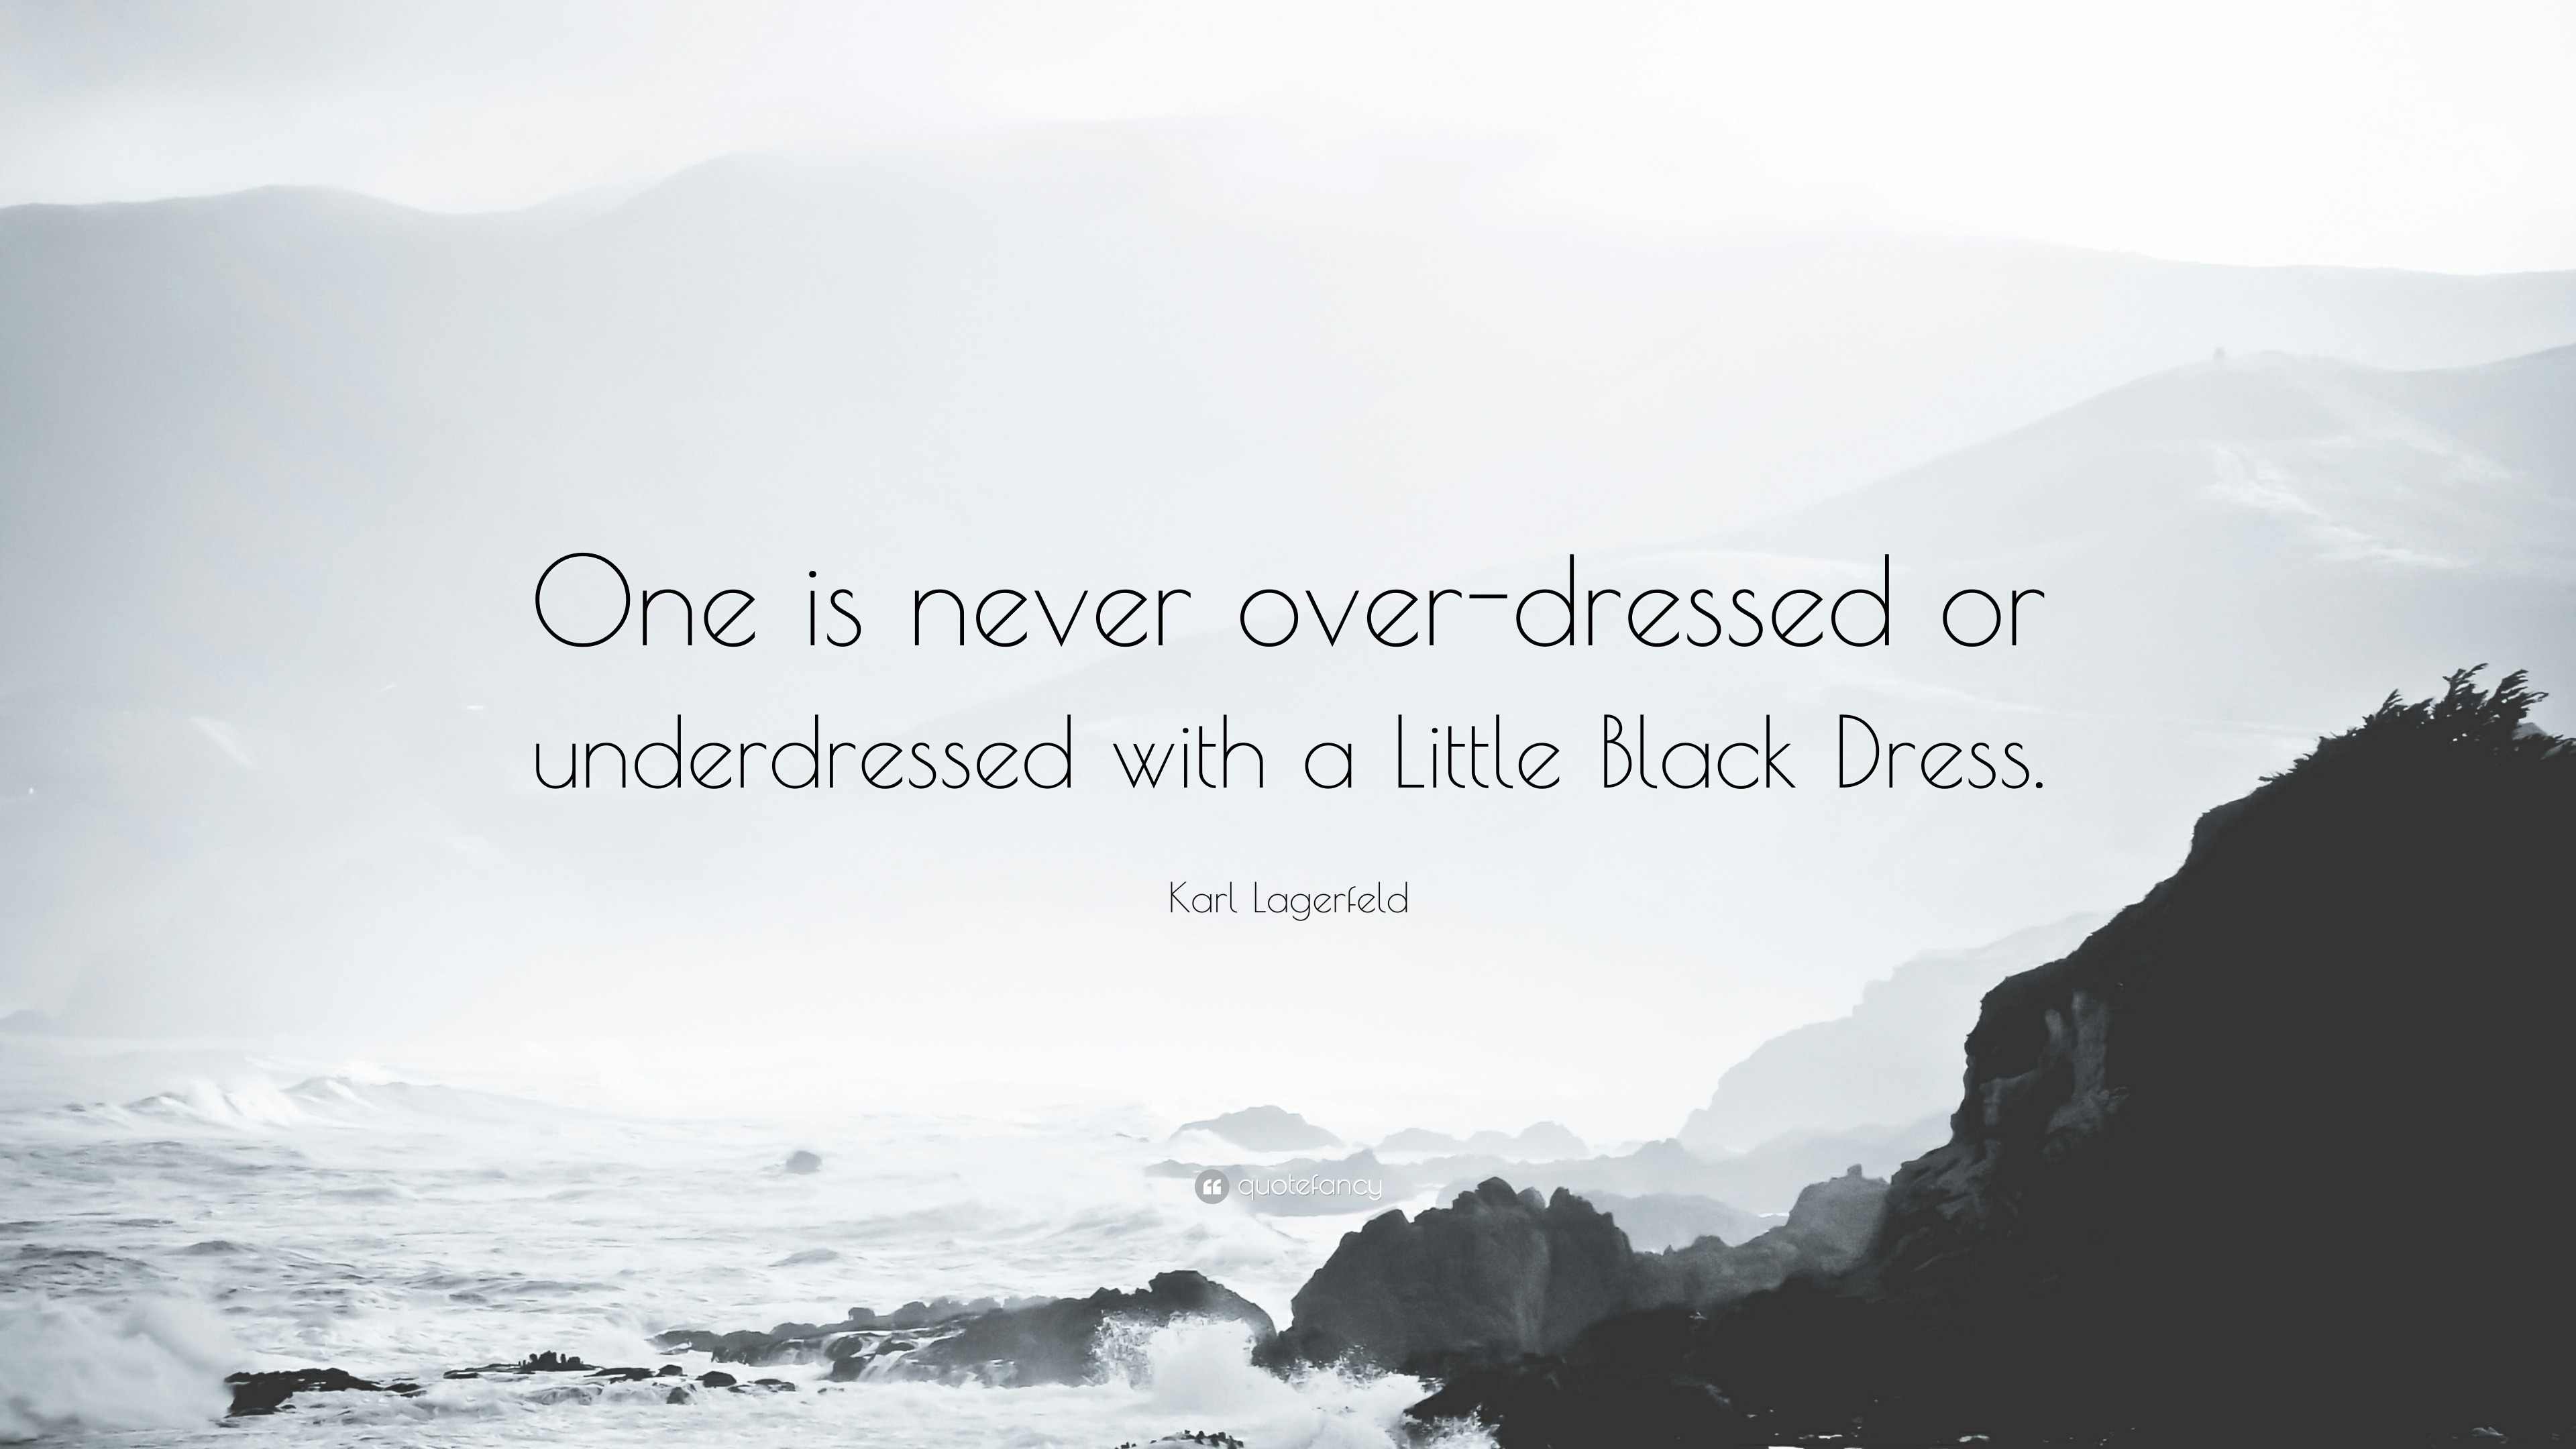 Karl Lagerfeld Quote: “One Is Never Over-Dressed Or Underdressed With A Little Black Dress.”